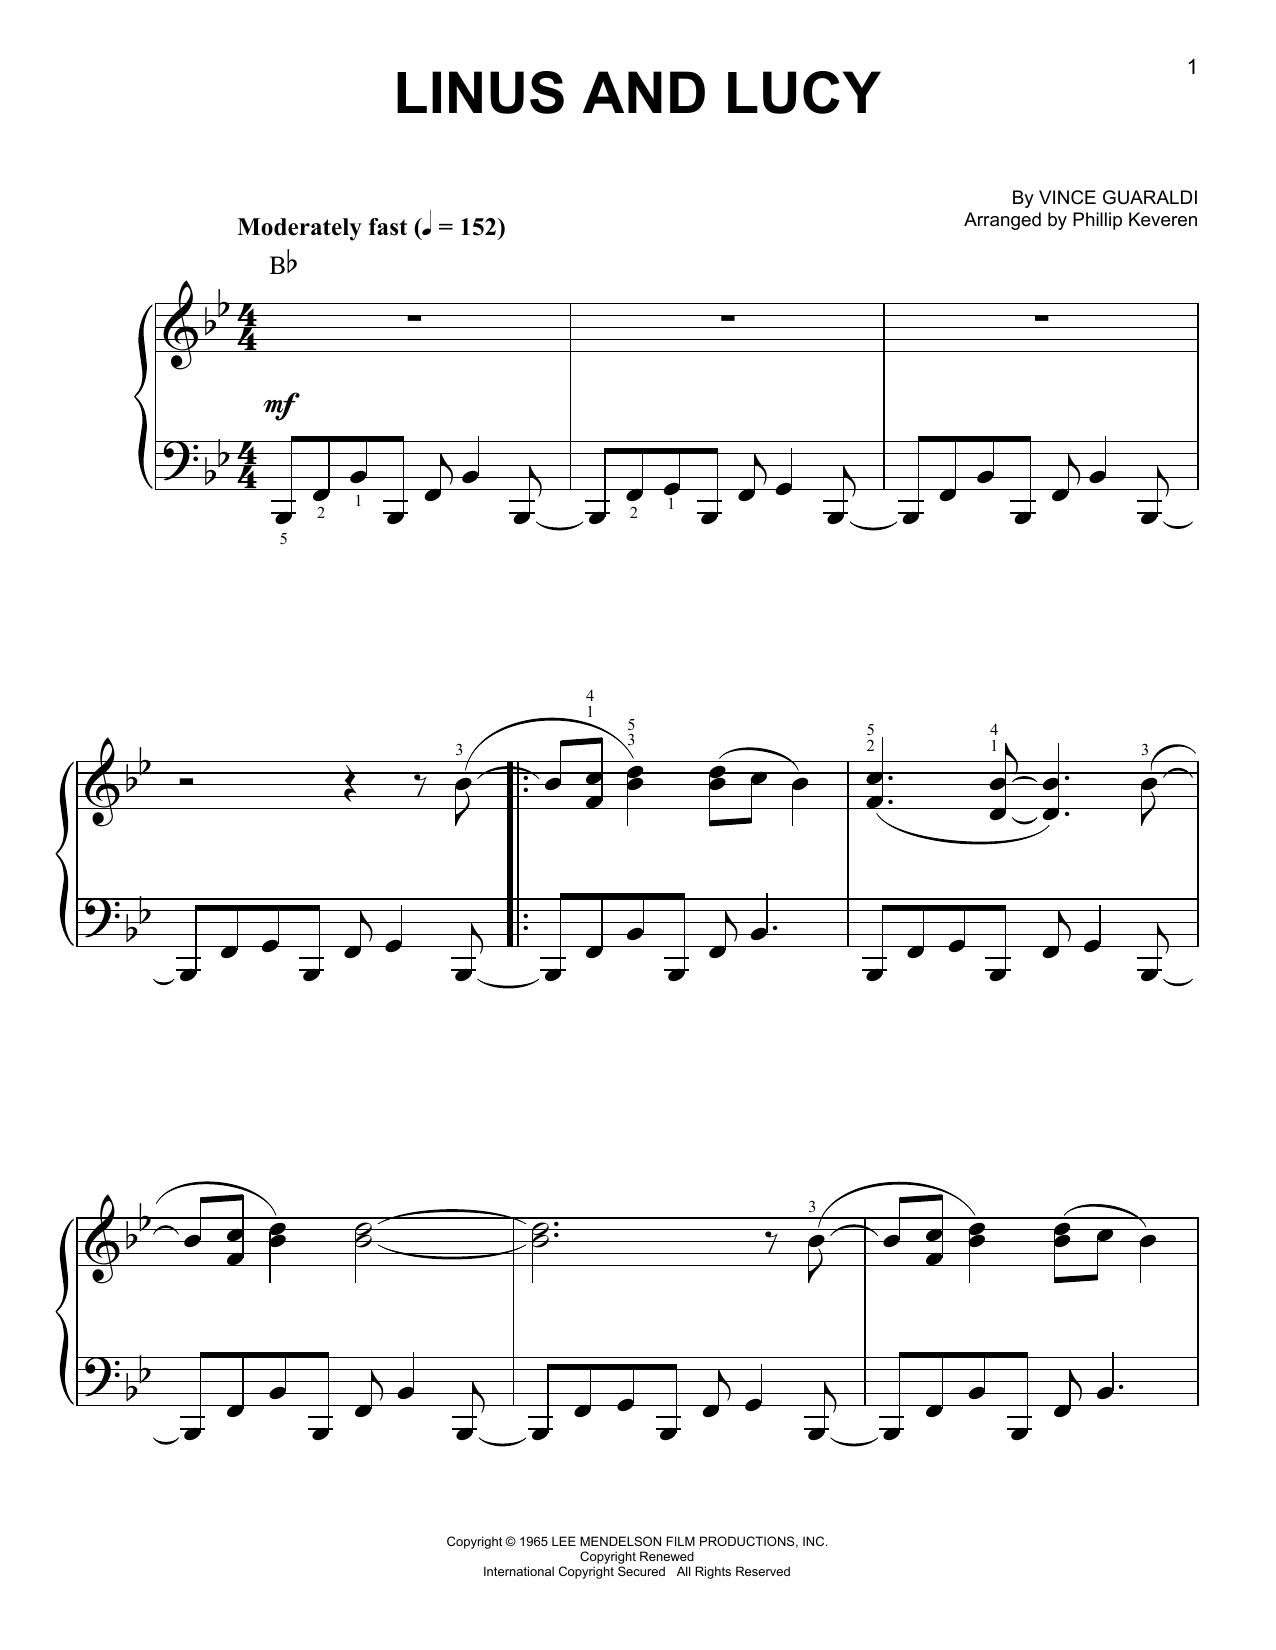 Phillip Keveren Linus And Lucy sheet music notes and chords. Download Printable PDF.